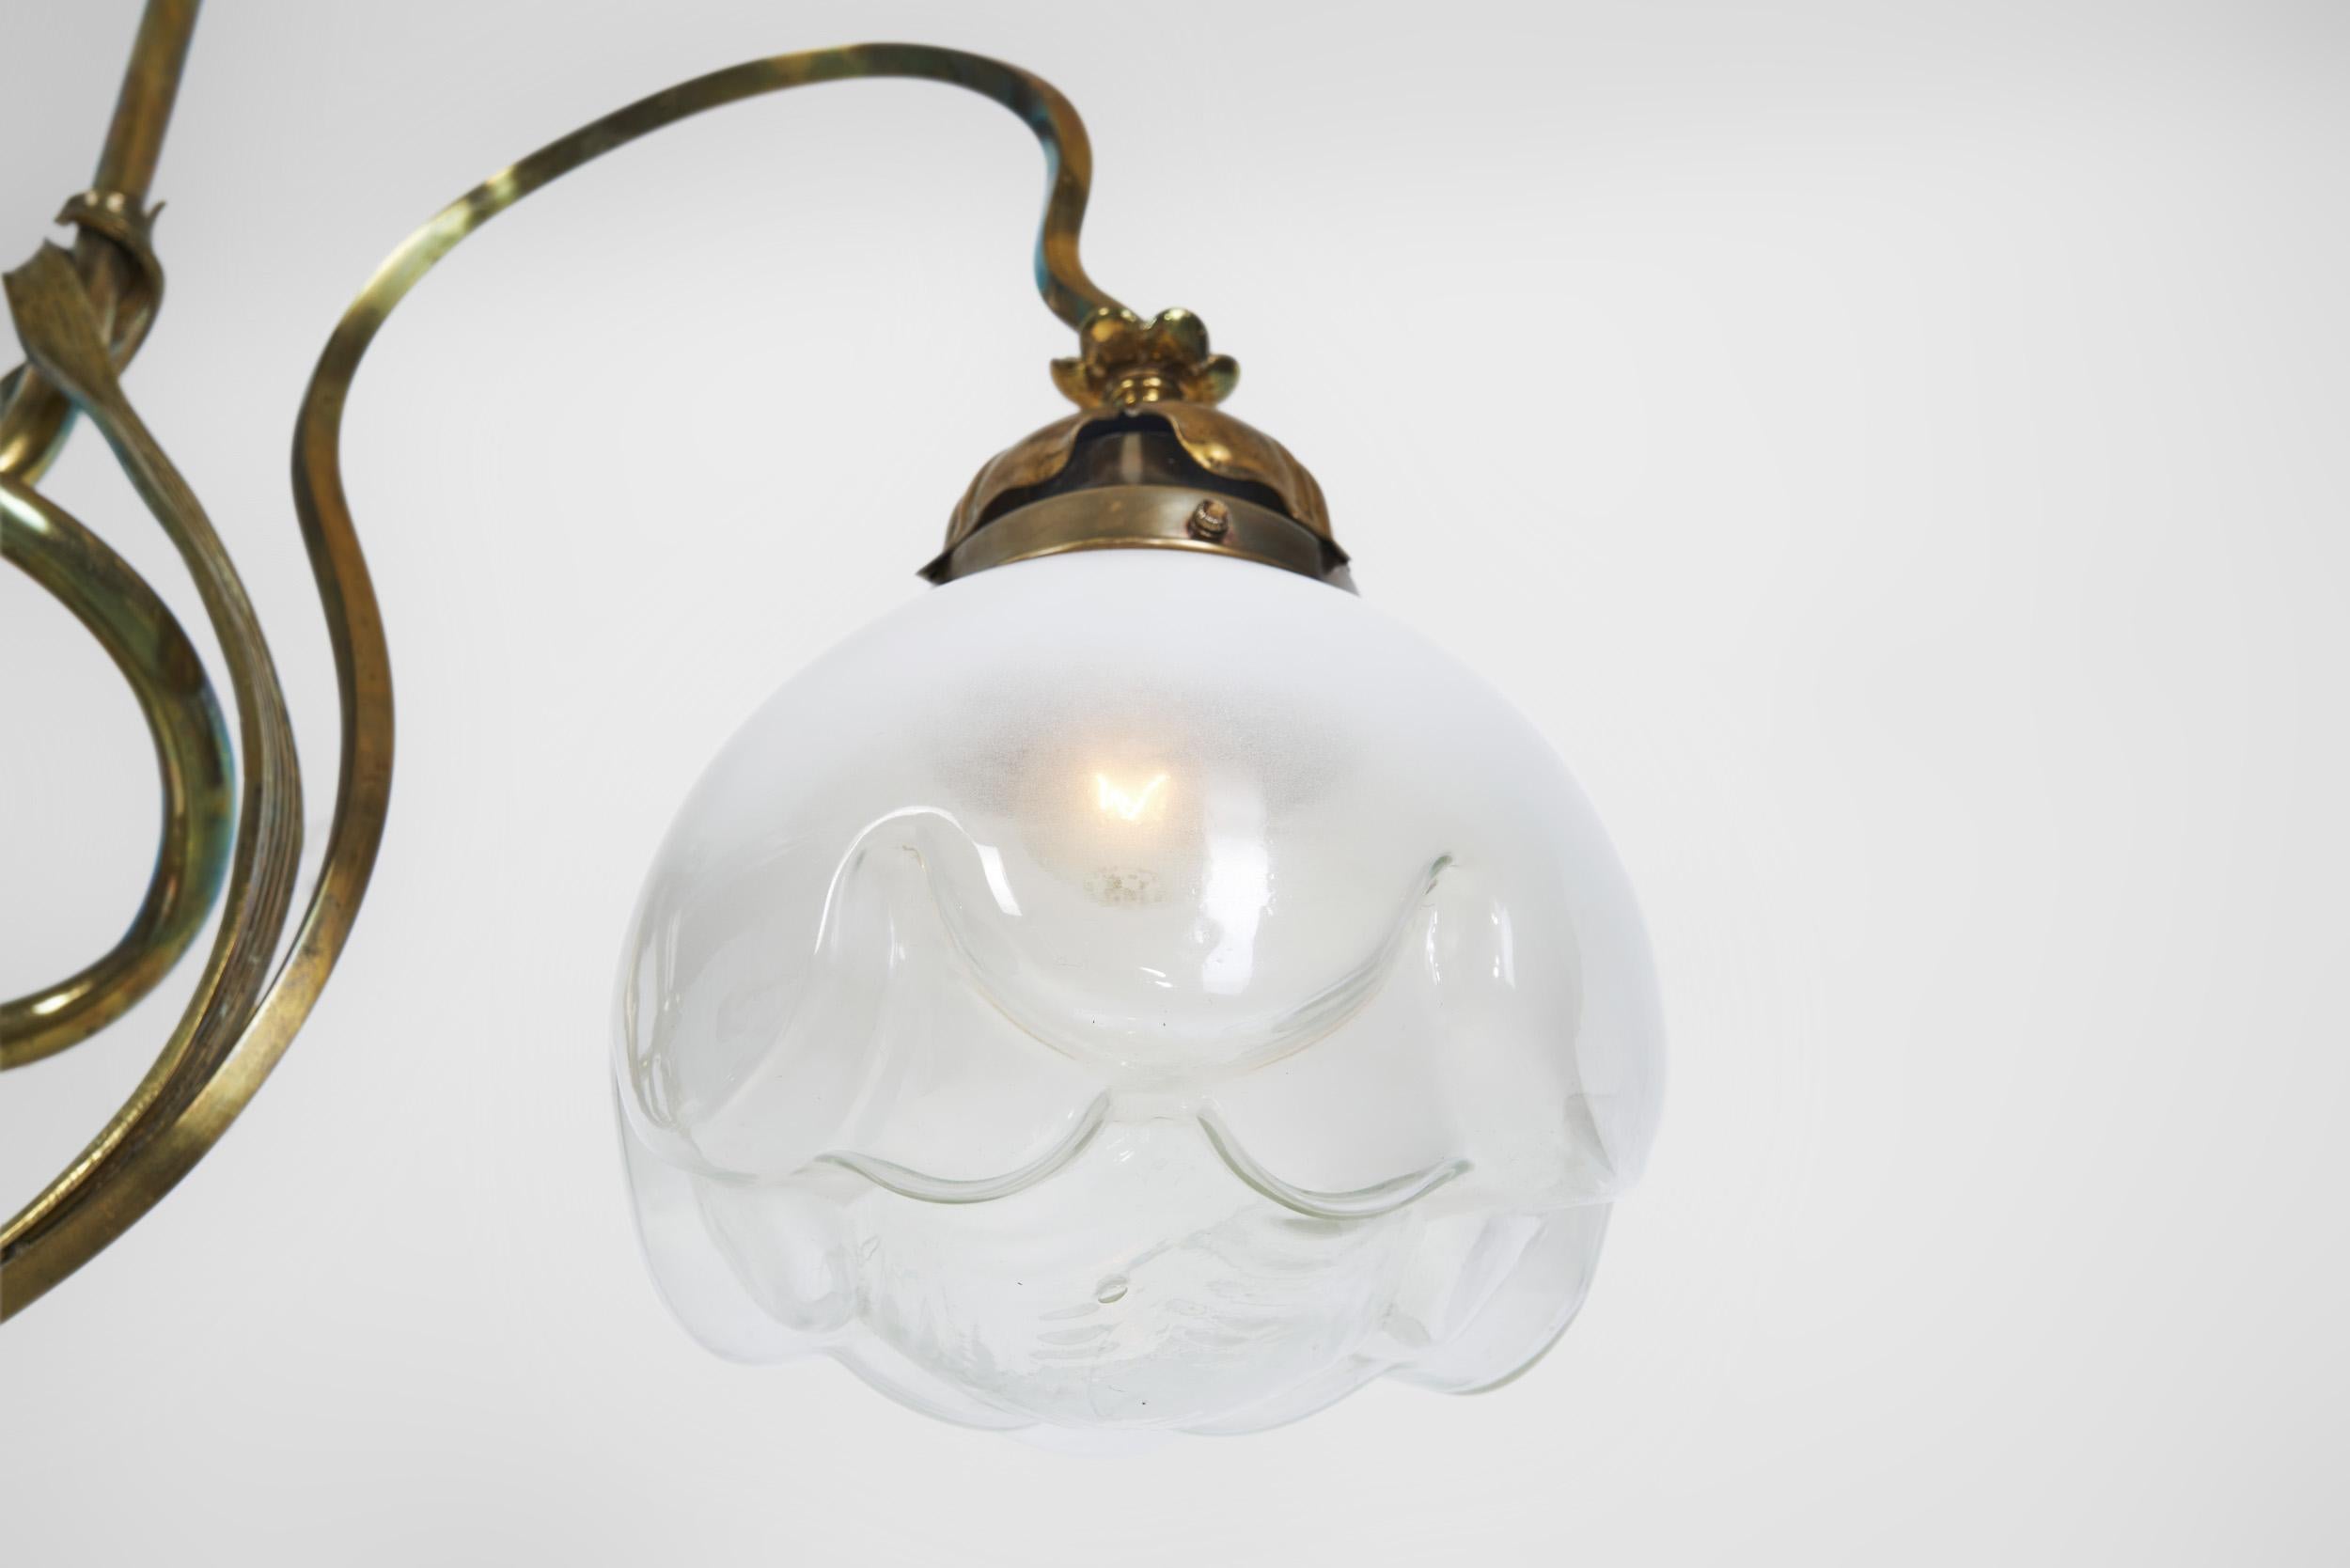 Jugend Ceiling Lamp in Patinated Brass and Glass, Europe early 20th century For Sale 10